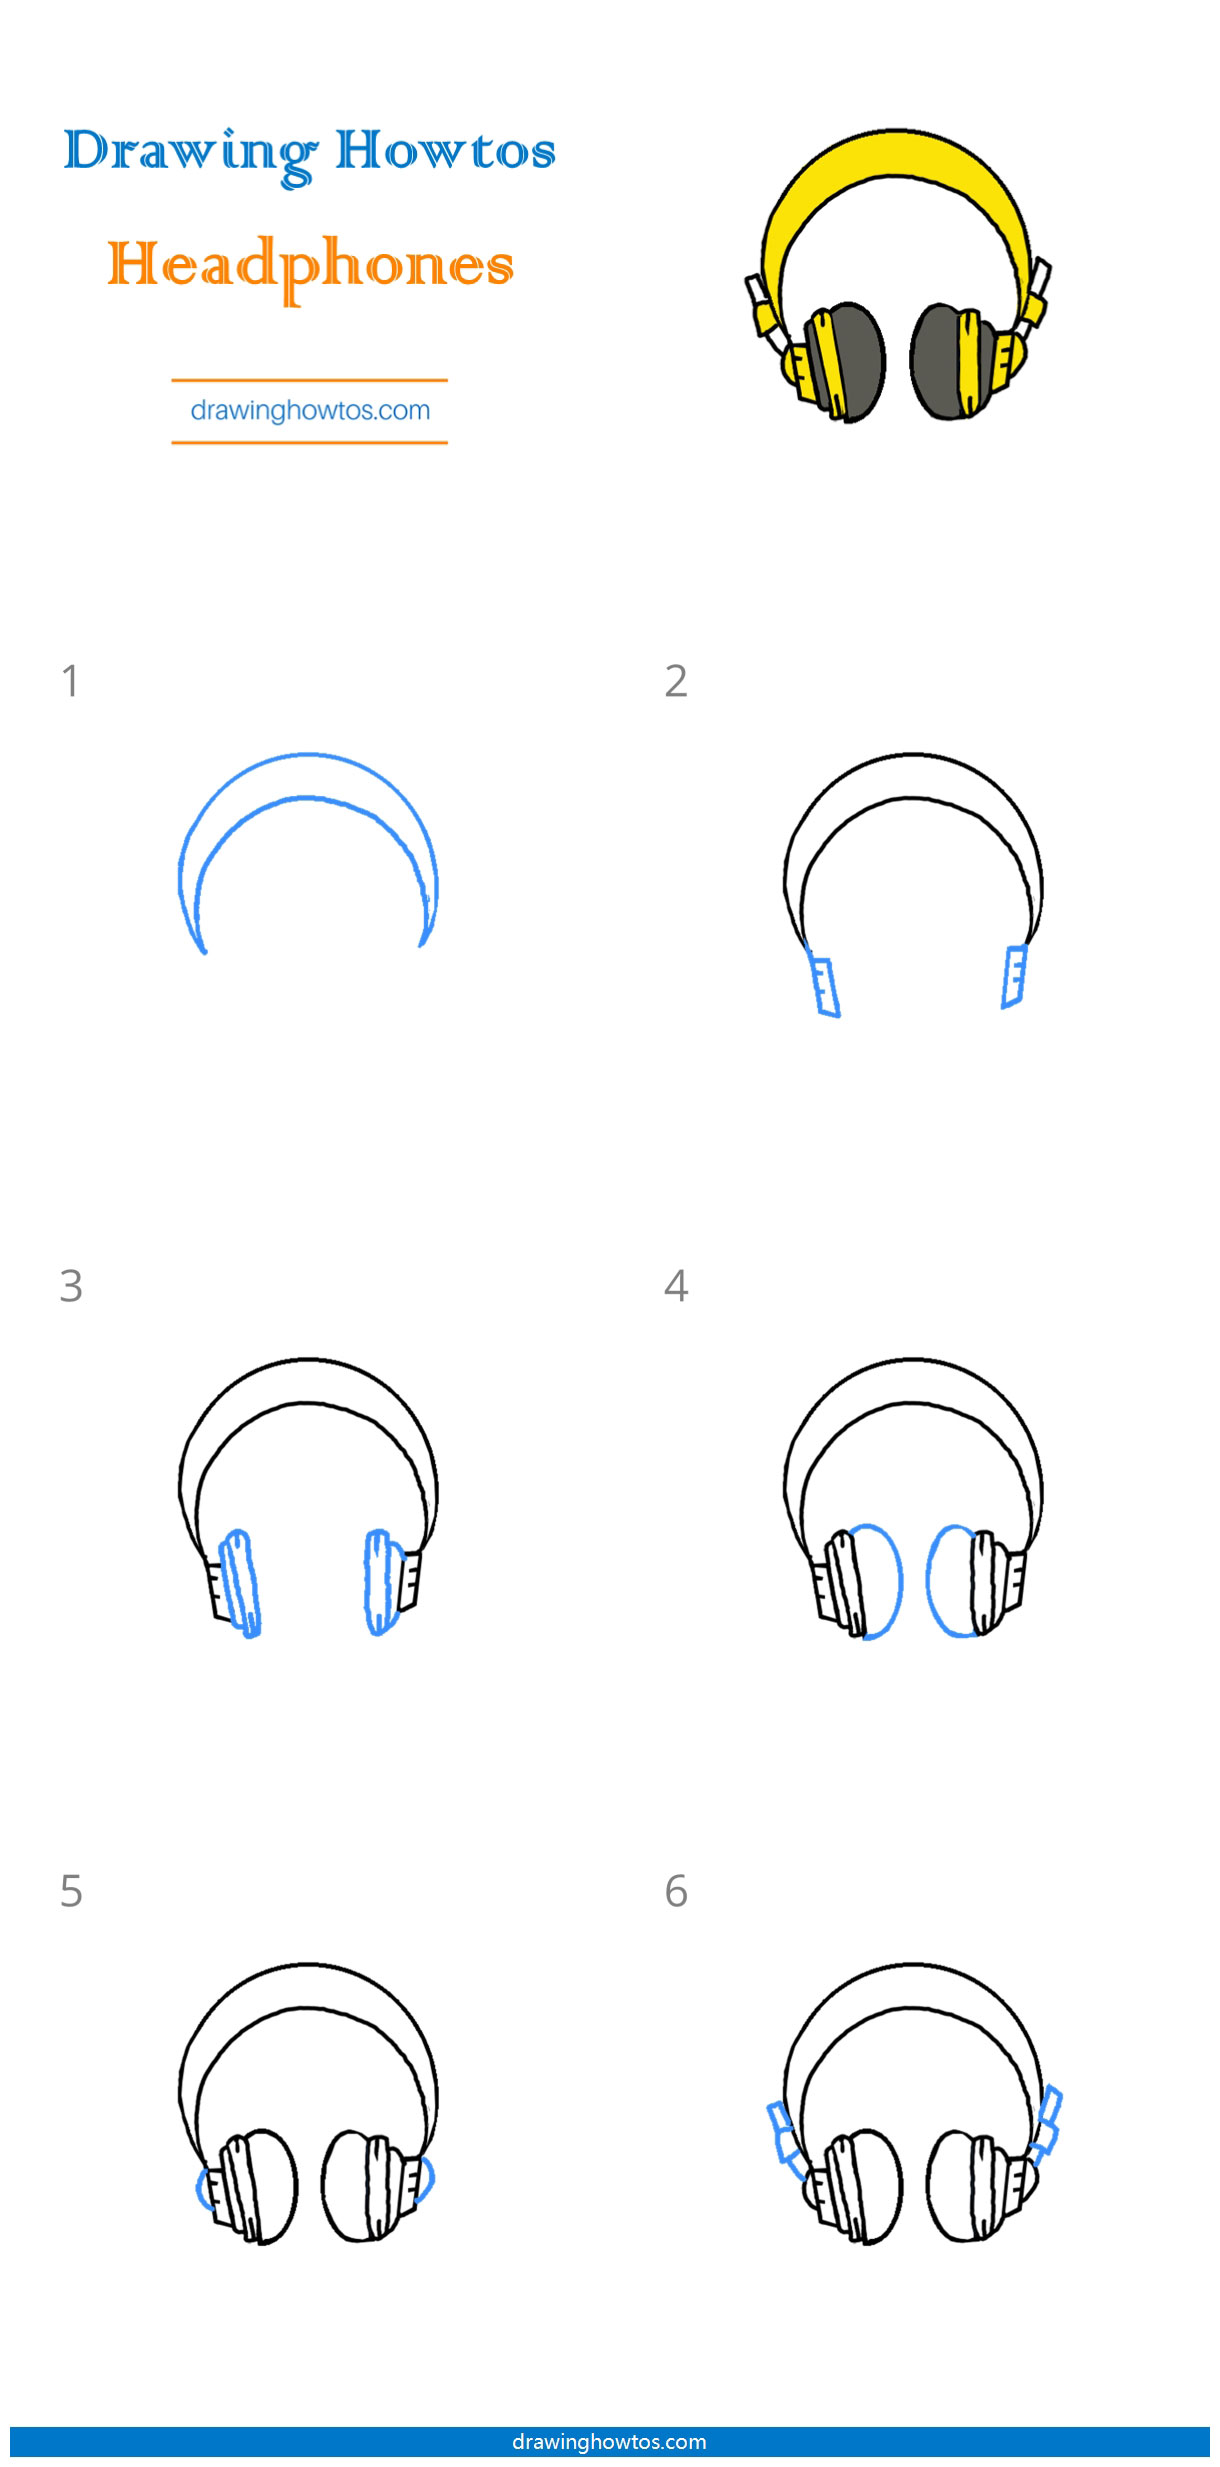 How to Draw Headphones - Step by Step Easy Drawing Guides - Drawing Howtos